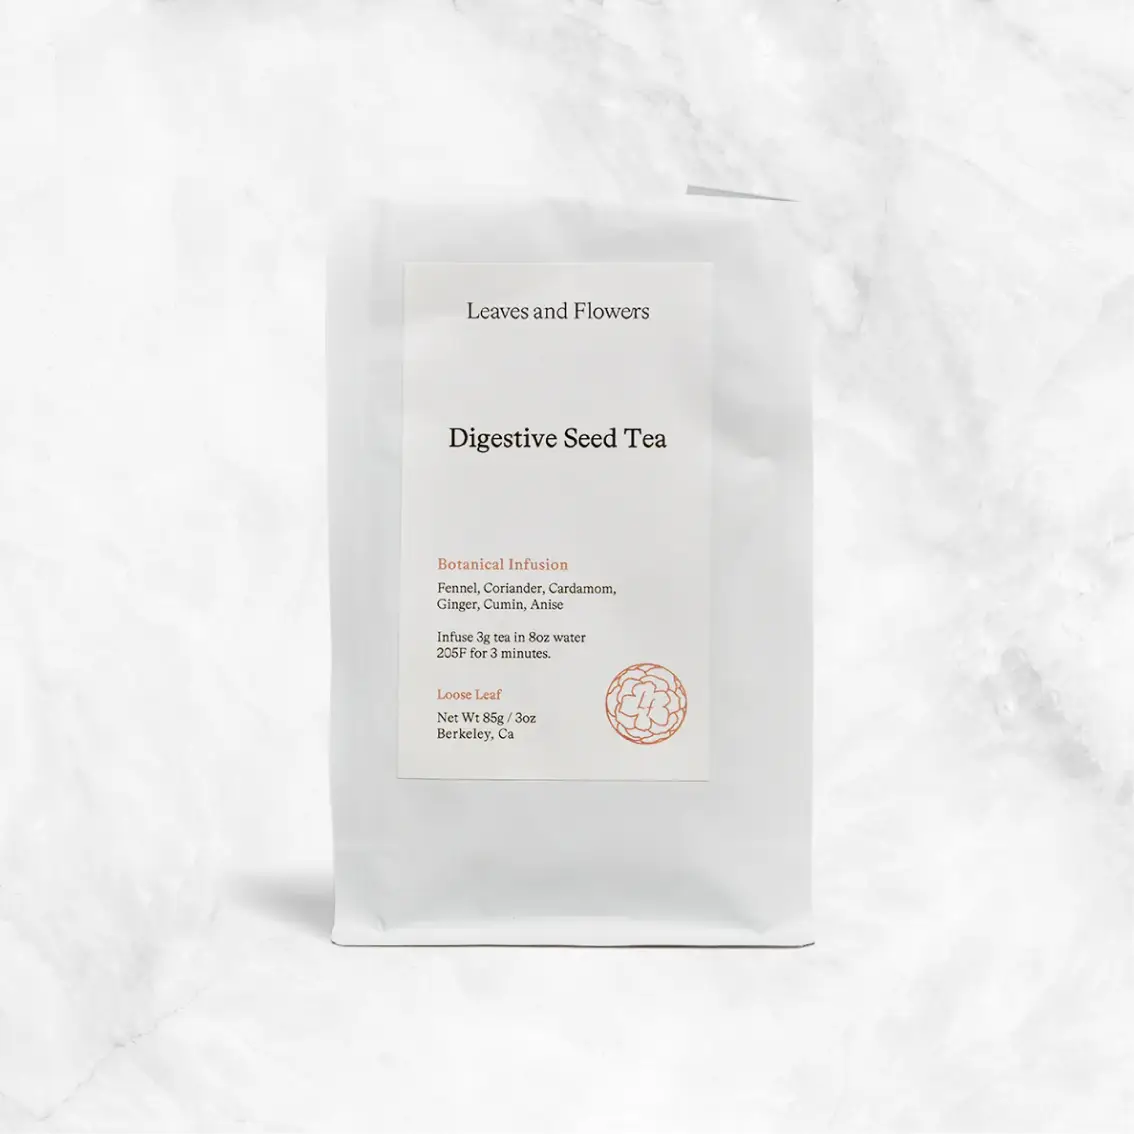 Digestive Seed Tea Delivery